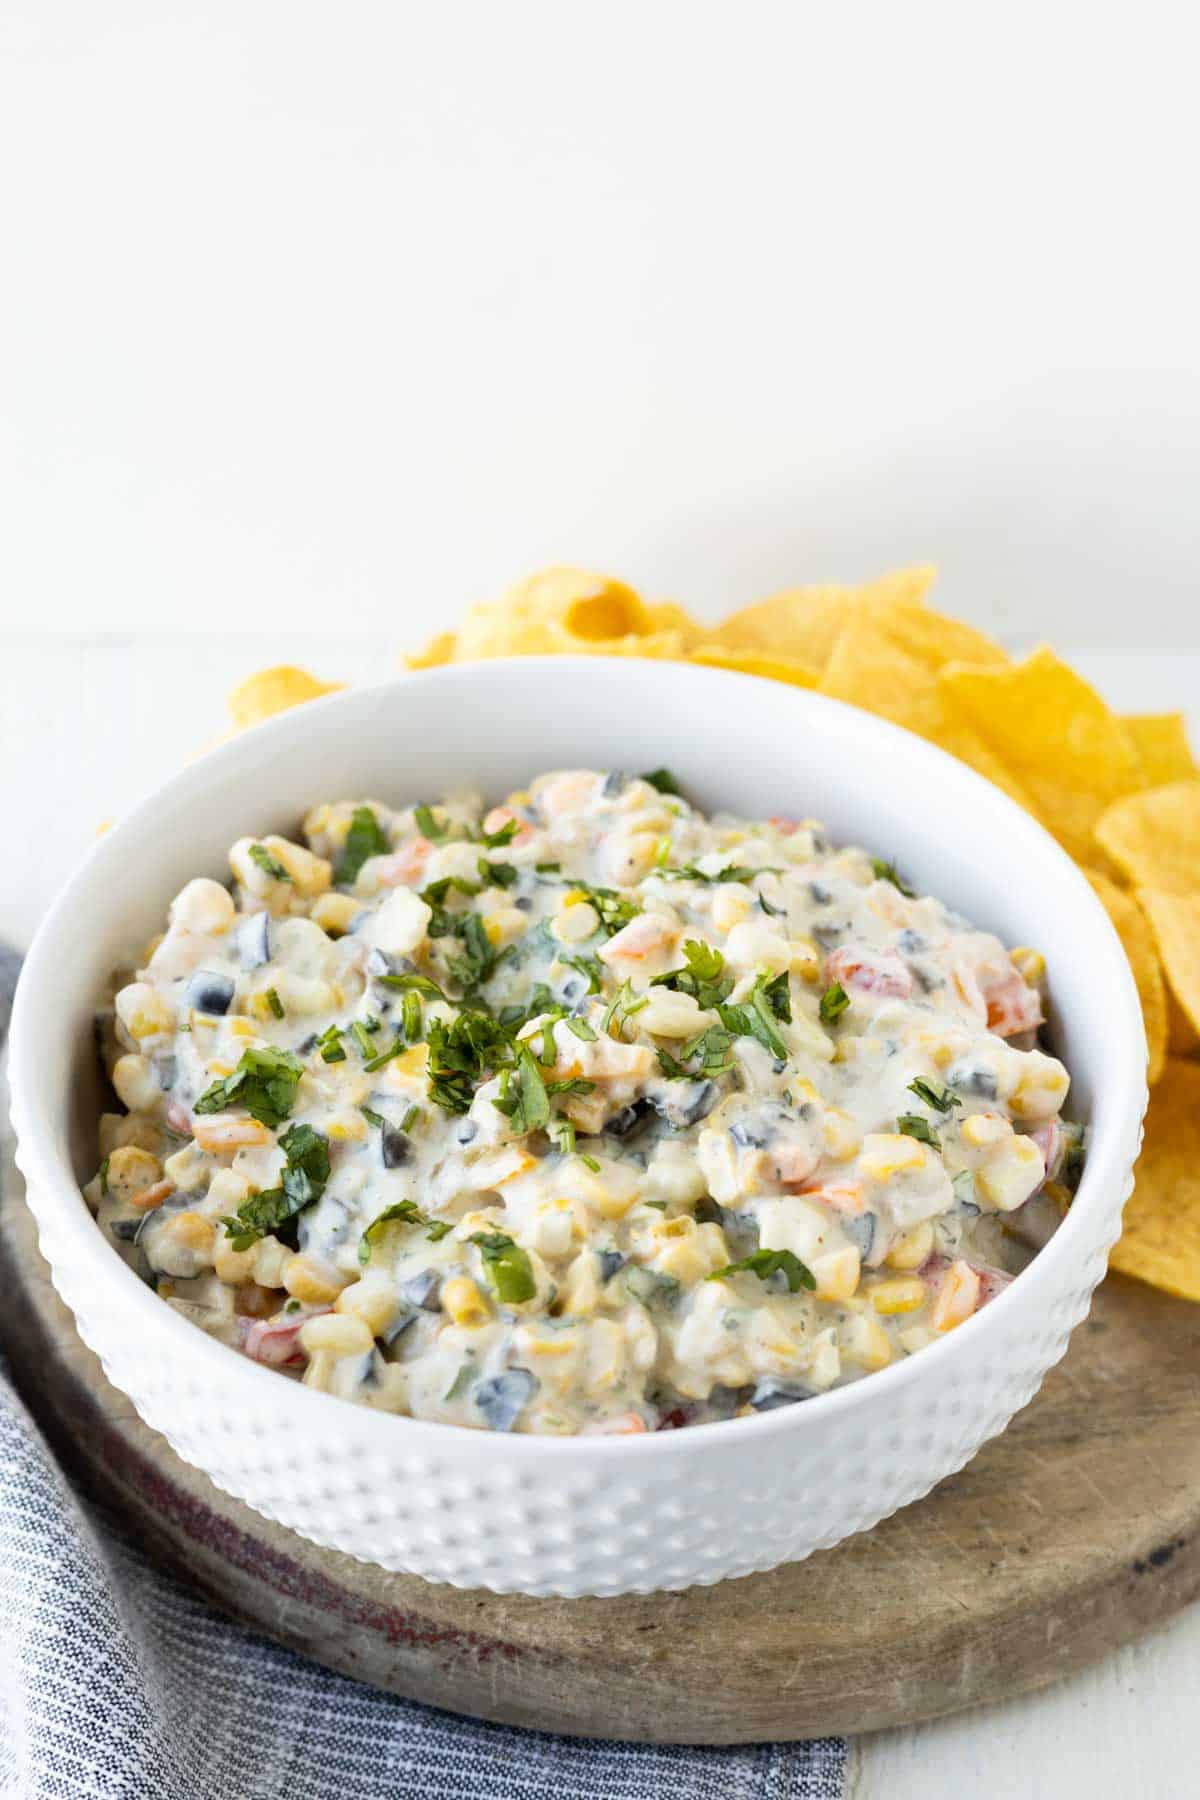 Image of poolside cream cheese dip with corn, peppers, olives, and herbs with tortilla chips.